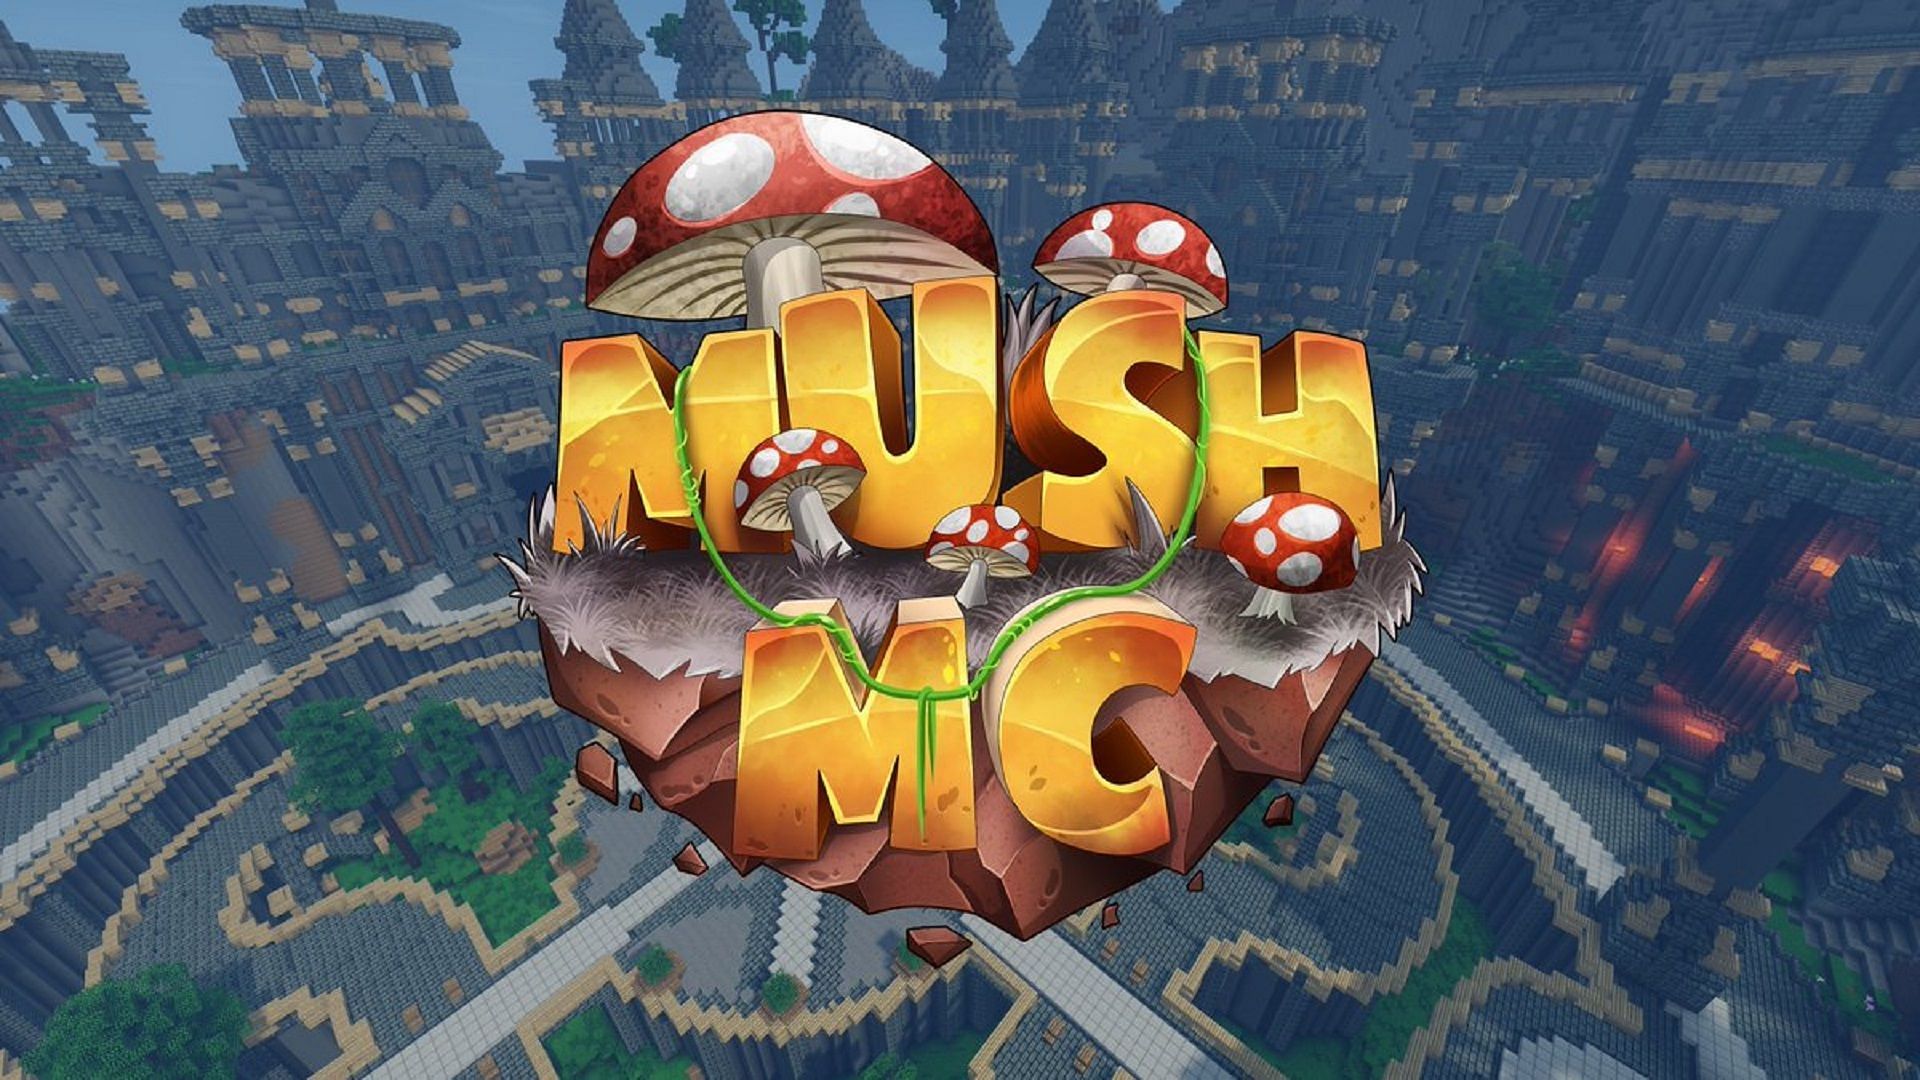 MushMC may have a language barrier for some players, but the Bedwars community is welcoming (Image via @MushMC_/Twitter)